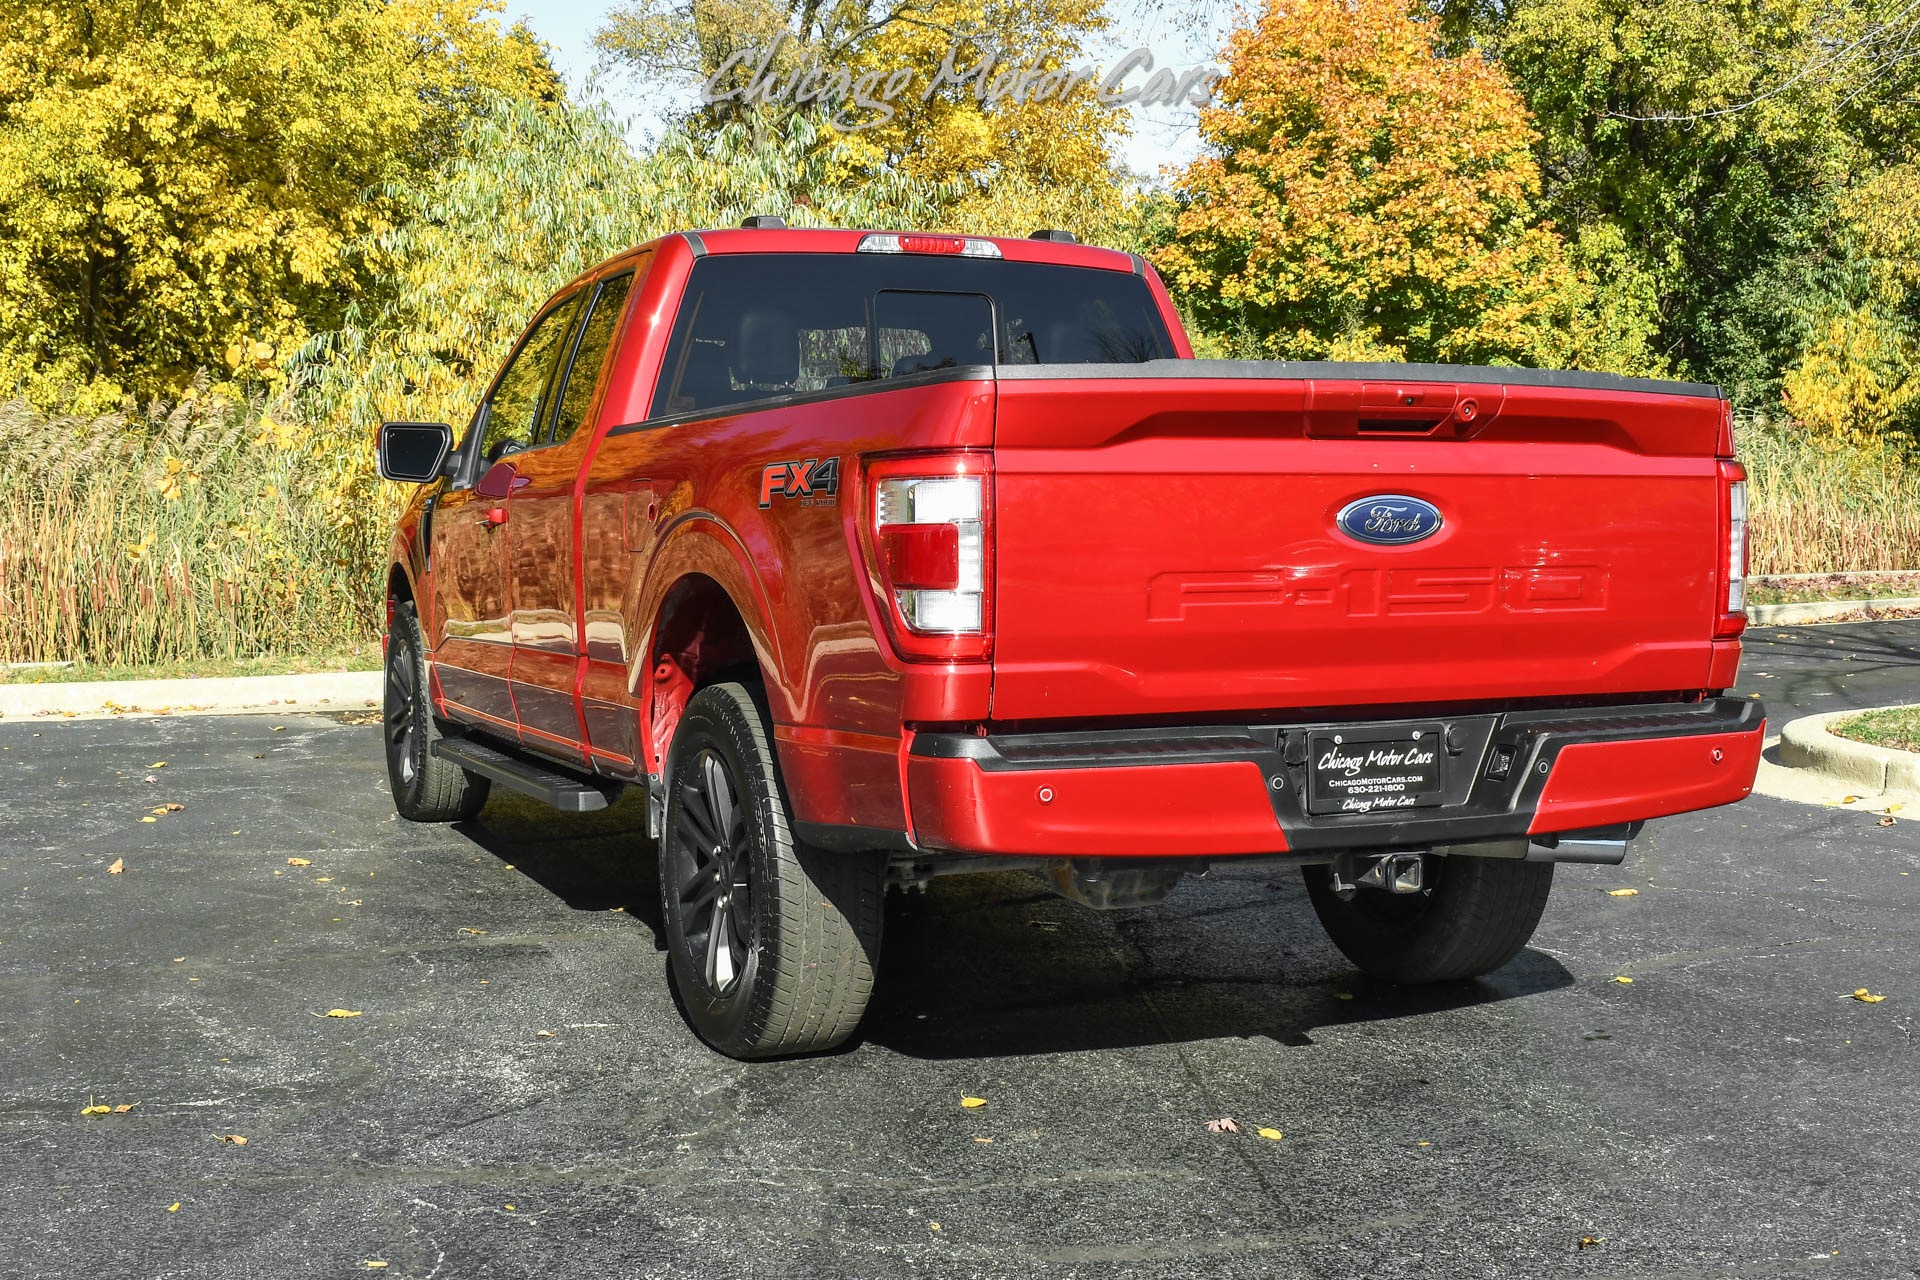 Used 21 Ford F 150 Lariat 4x4 Supercab Pickup 5 0 V8 For Sale 51 800 Chicago Motor Cars Stock